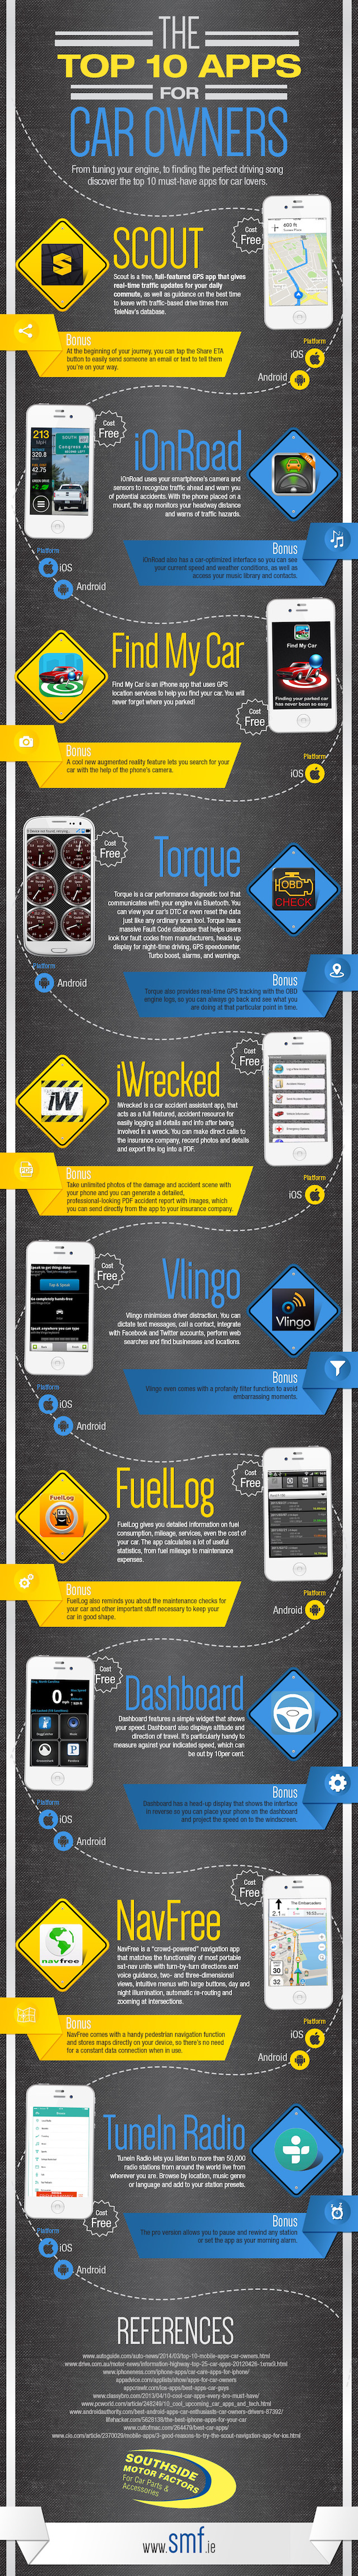 Top 10 car apps infographic